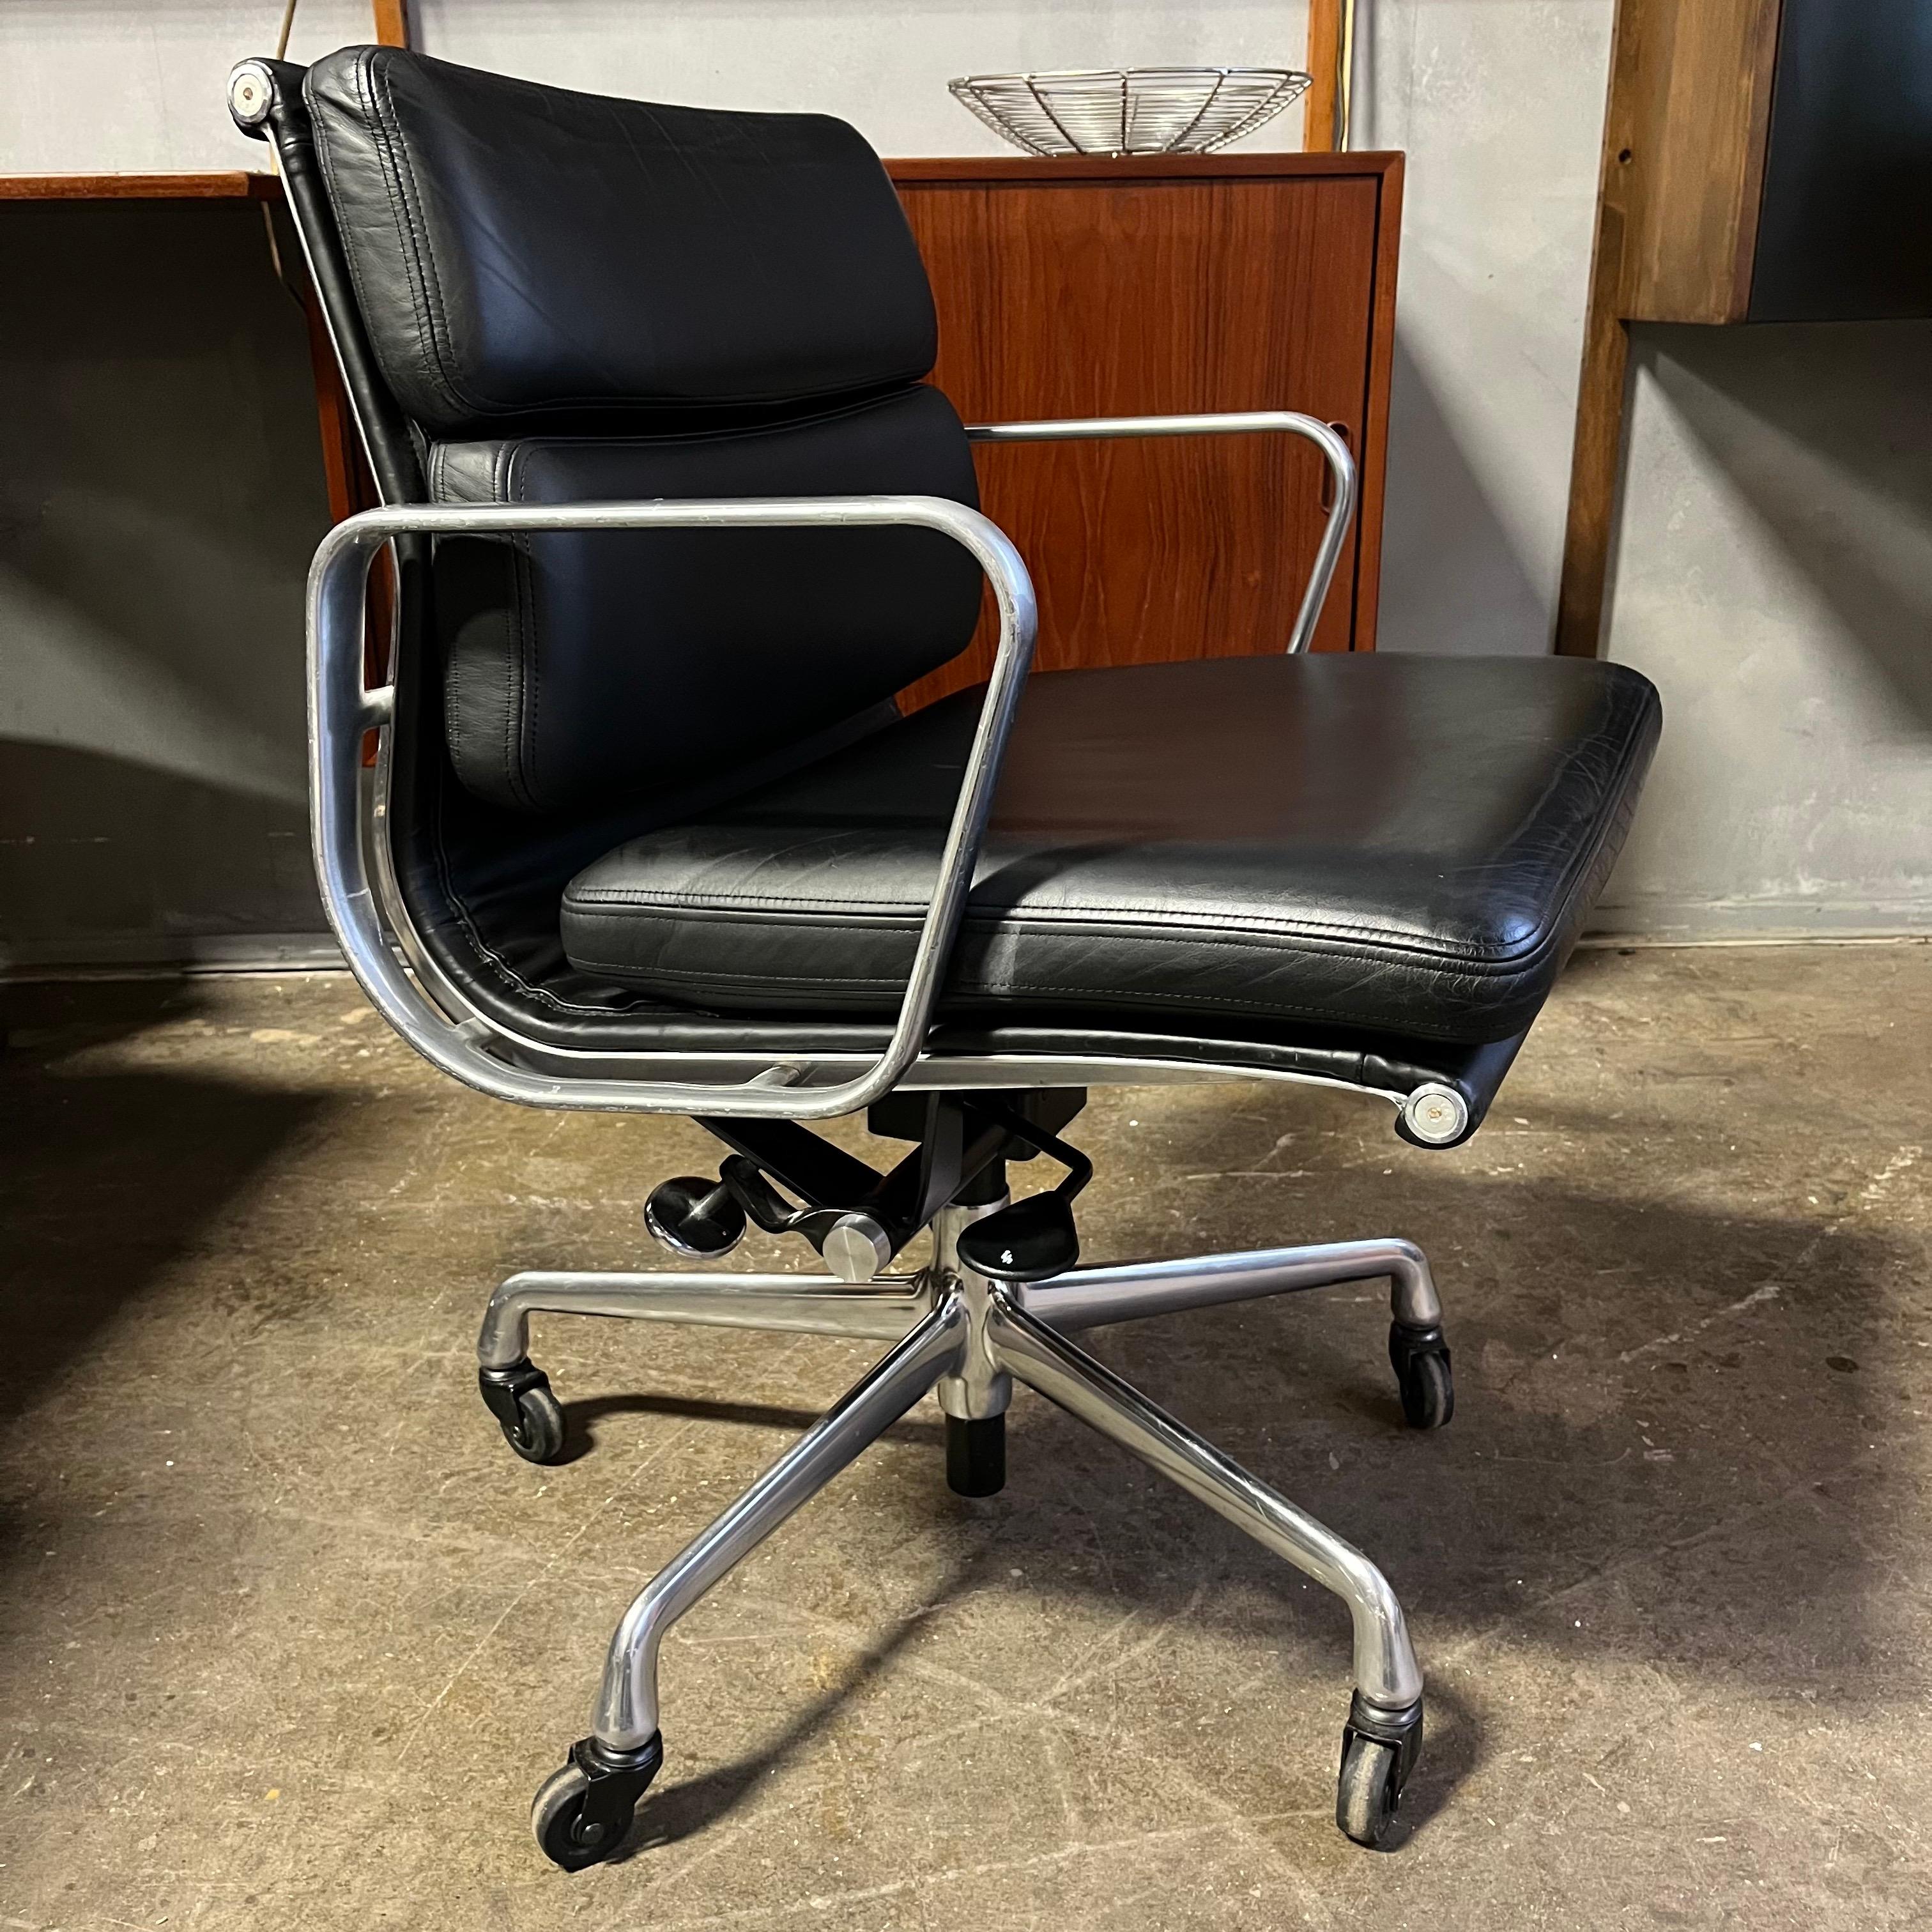 For your consideration is this authentic Eames for Herman Miller vintage soft pad chairs in black leather. Adjustable tilt and height with pneumatic lift. These authentic vintage examples are icons of Mid-Century Modern design. The chairs part of